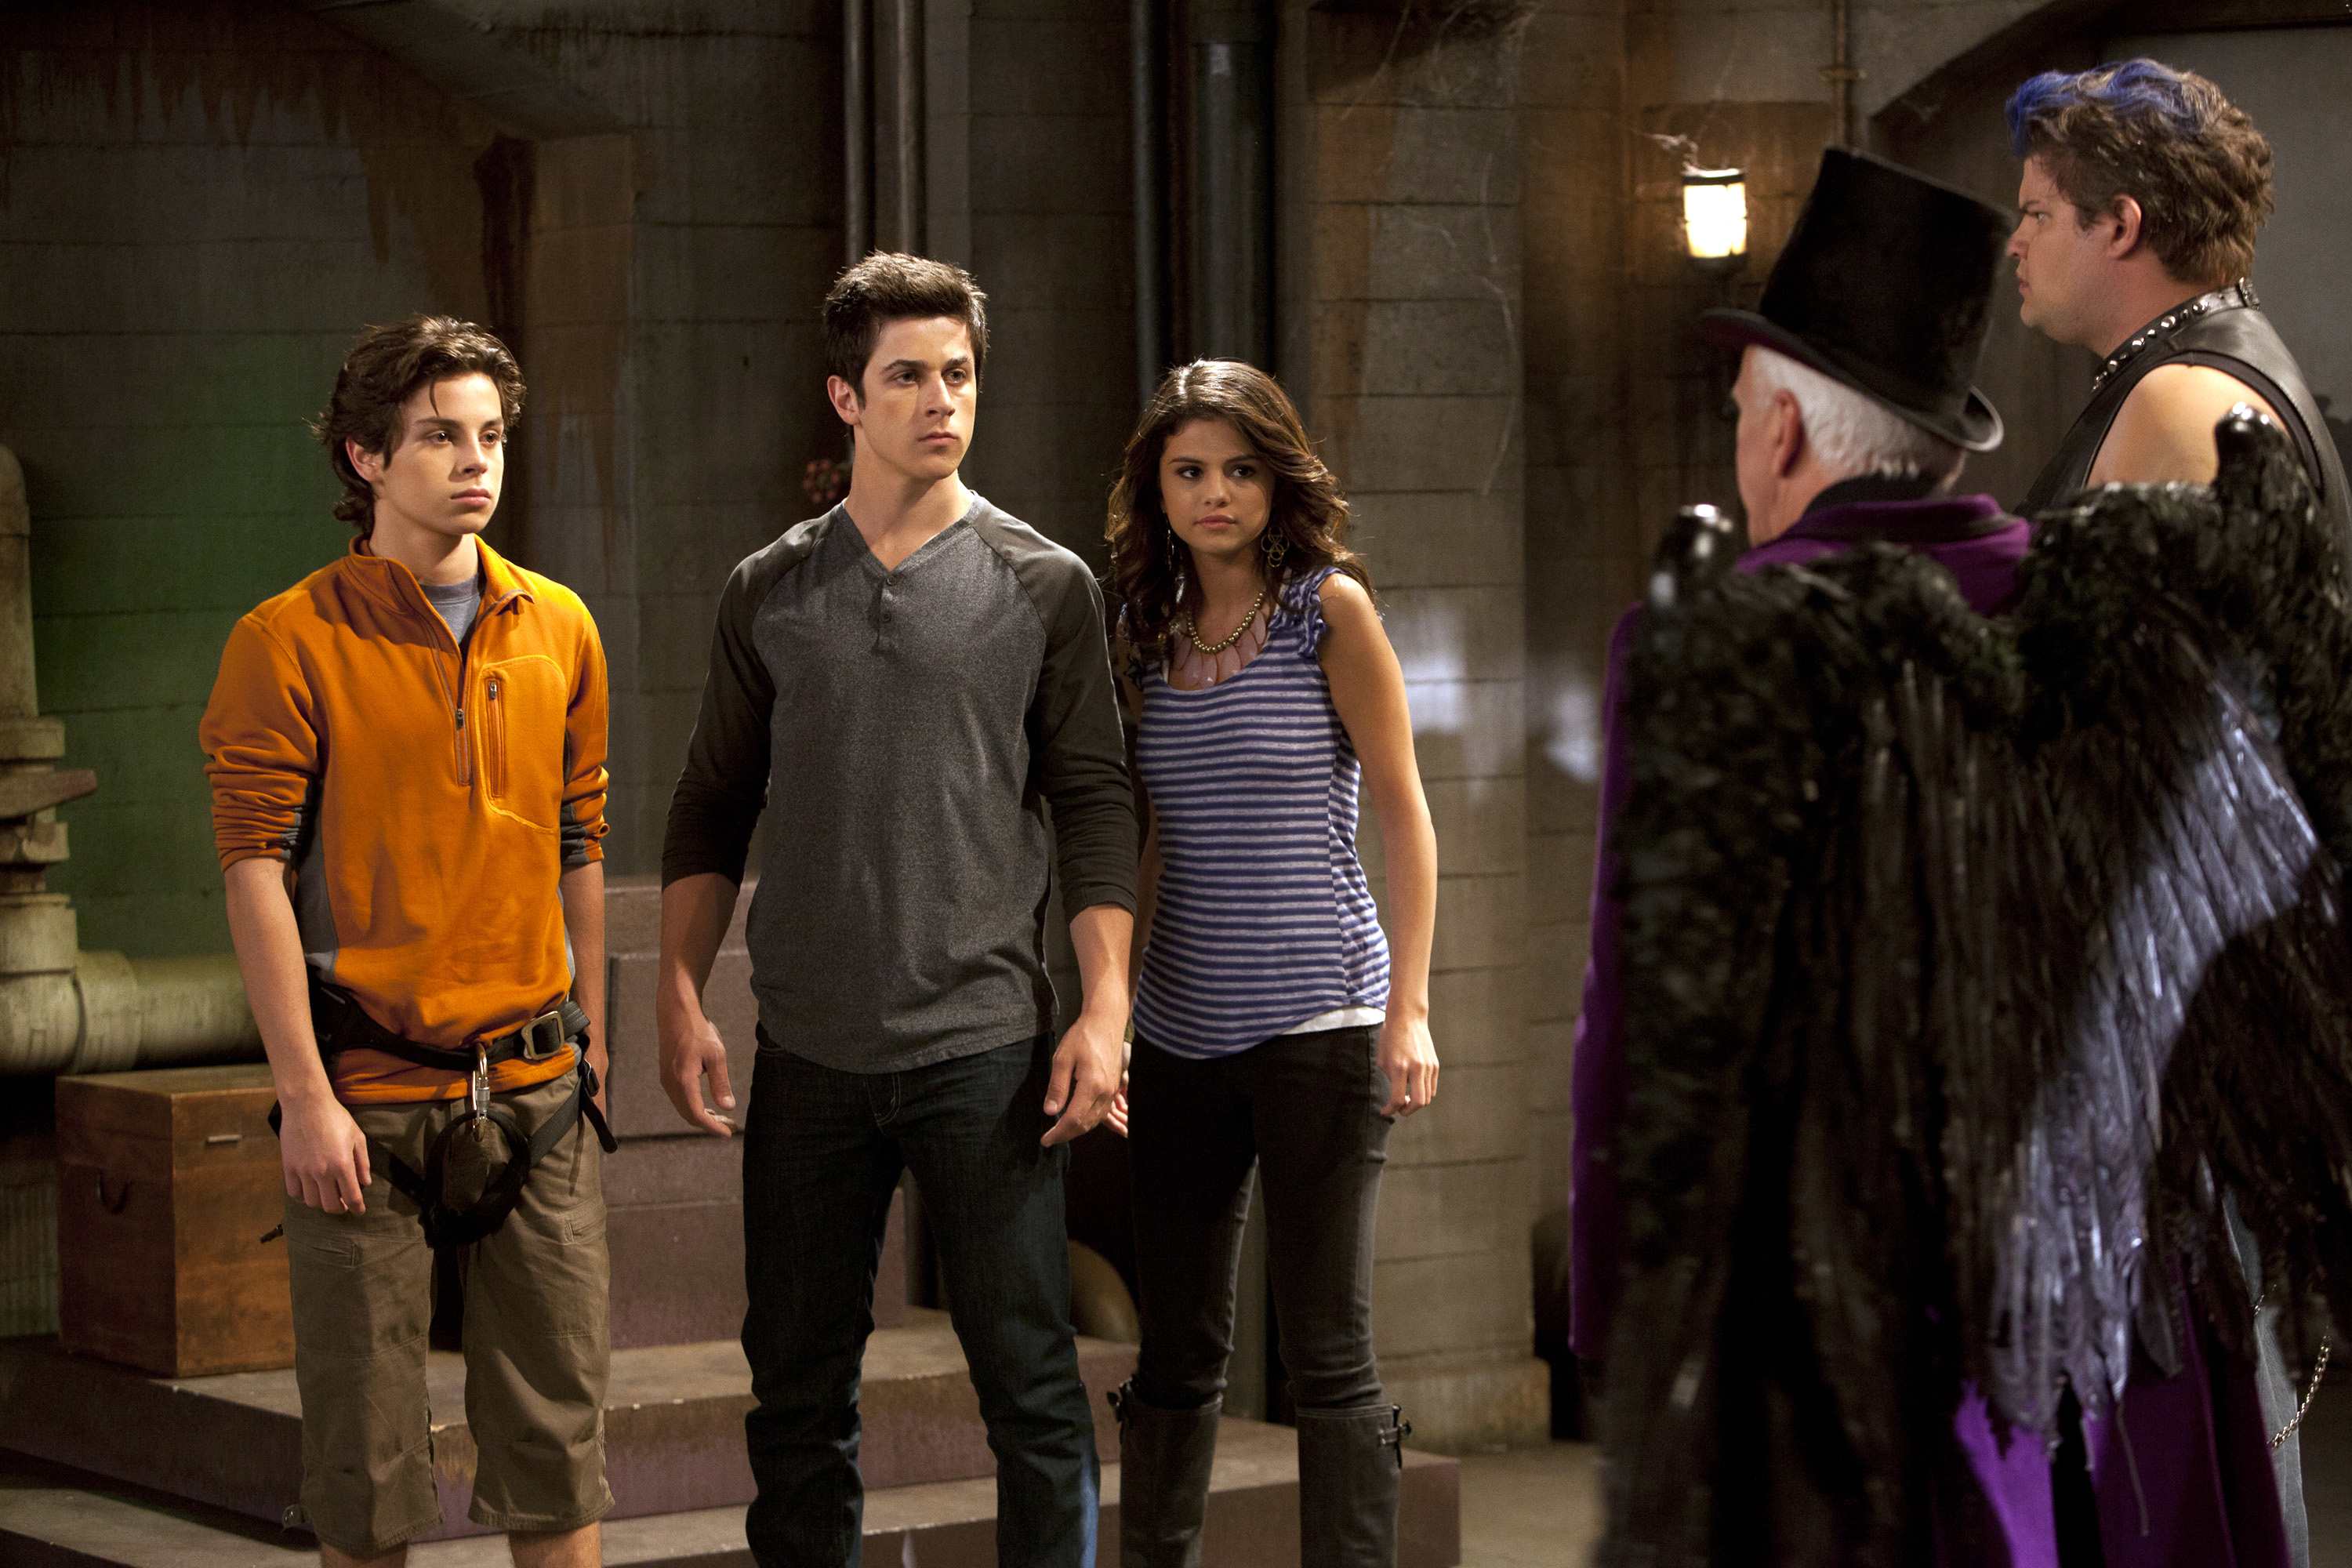 Jake T. Austin in Wizards of Waverly Place (Season 4) - Picture 11 of 87. 